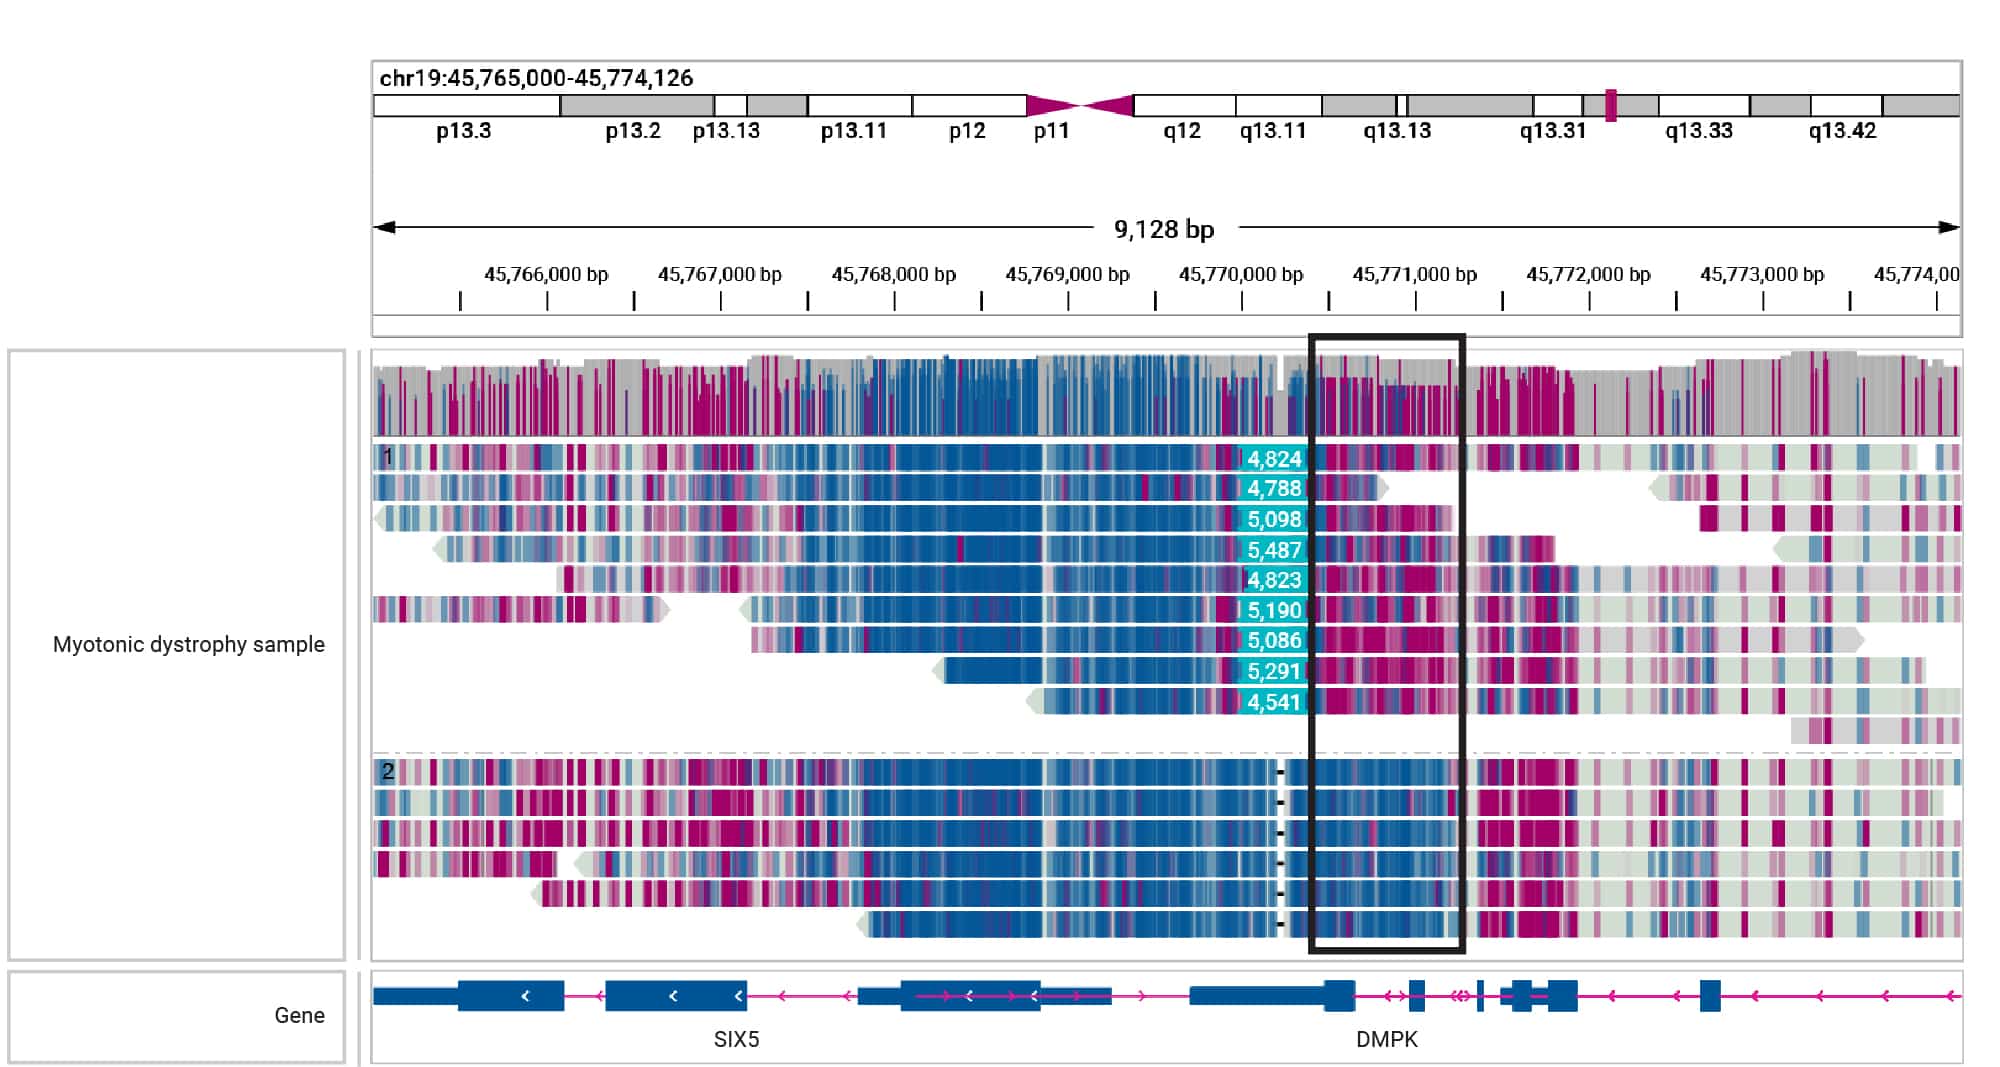 HiFi sequencing phases and identifies hypermethylation of the region adjacent to a mosaic 5 kb DMPK expansion in a sample with myotonic dystrophy (Children’s Mercy Kansas City). Magenta indicates methylation, while blue indicates unmethylated bases.